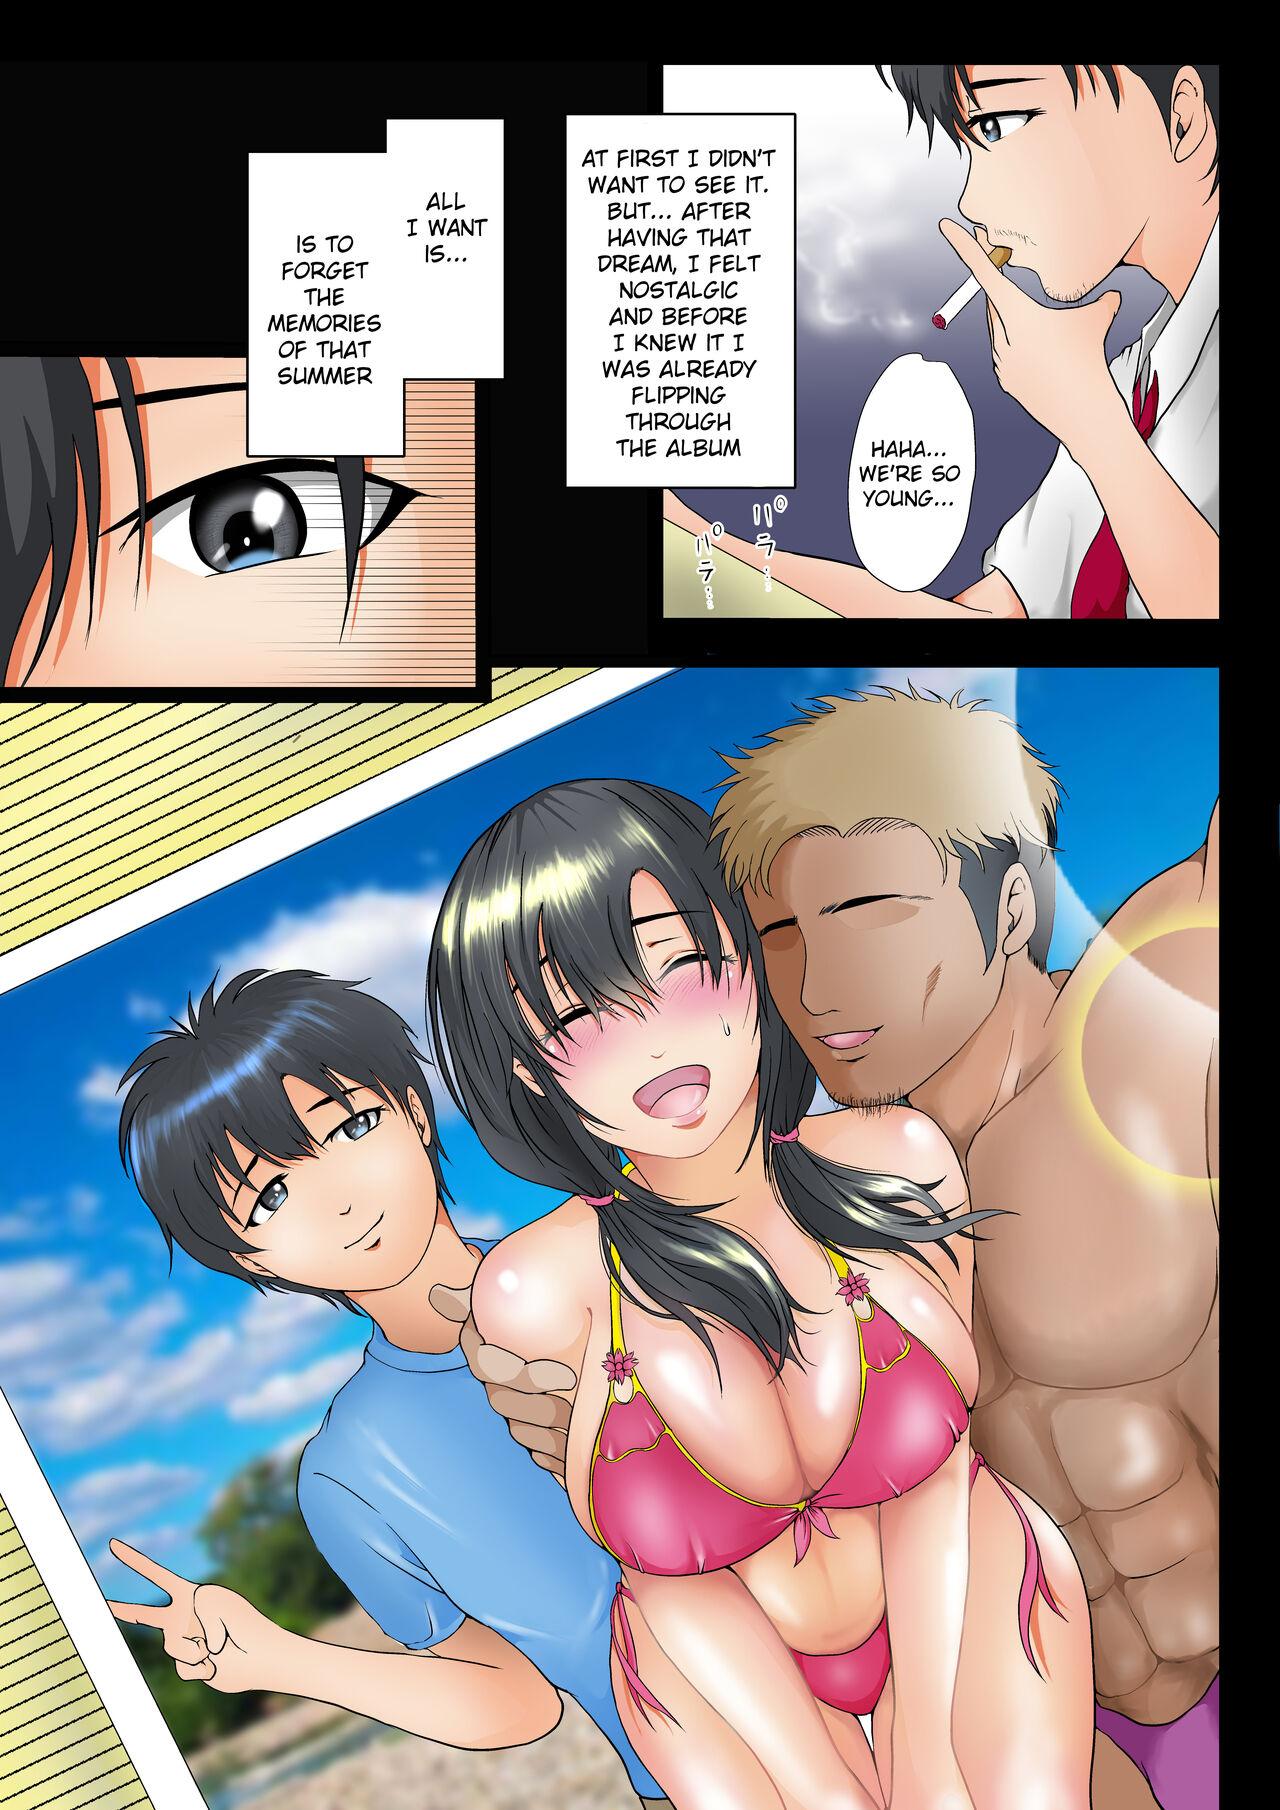 Nude The reason why the bond with my childhood friend is broken so easily - Original Cutie - Page 6